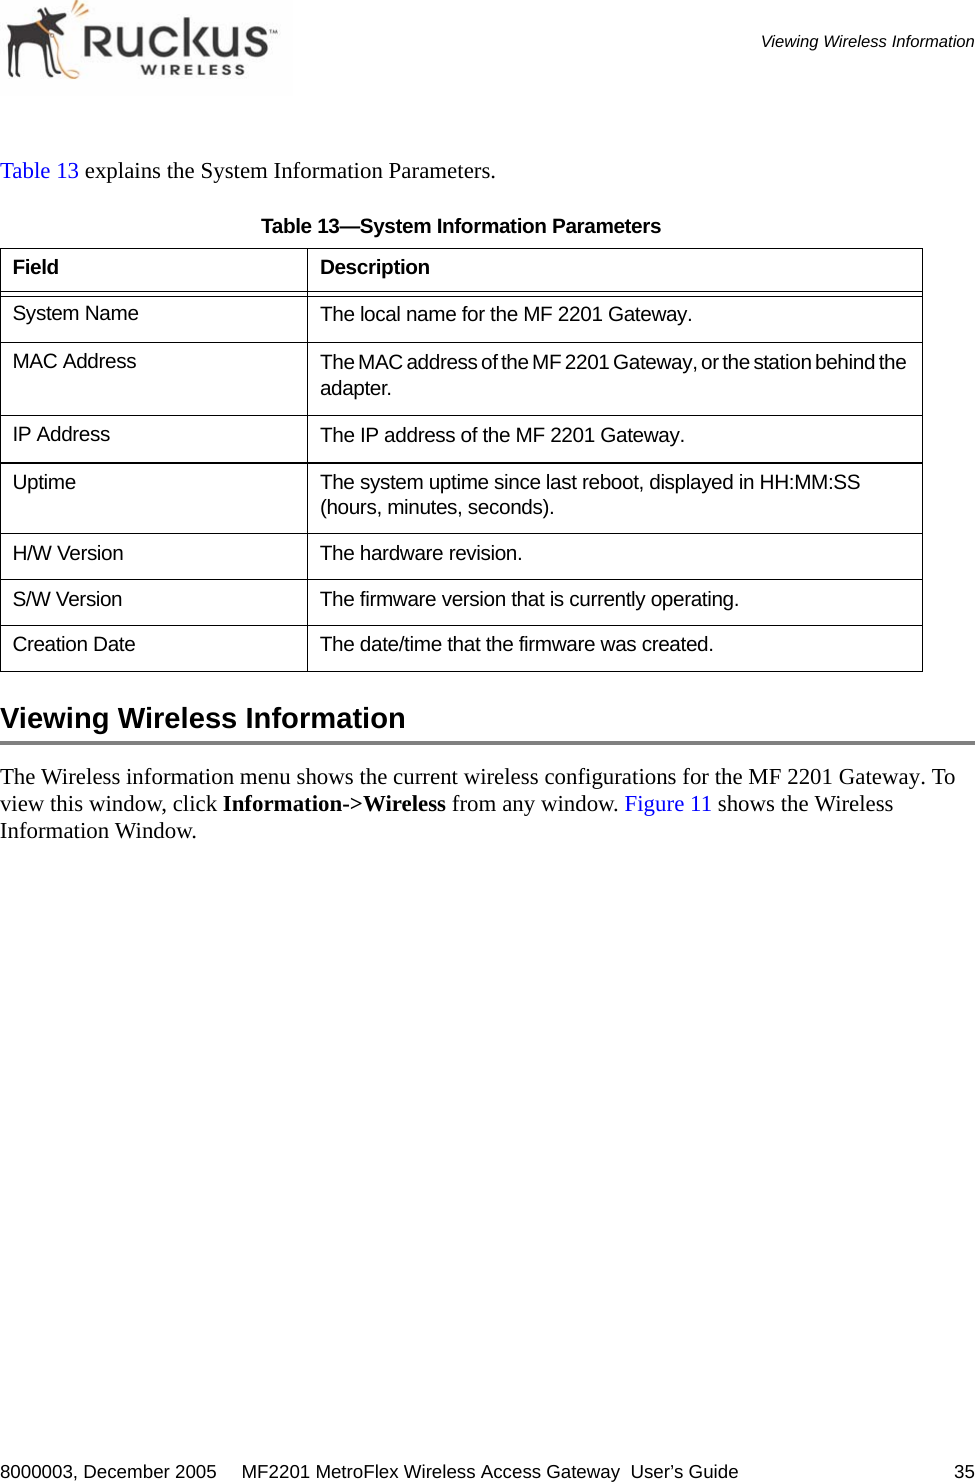 8000003, December 2005  MF2201 MetroFlex Wireless Access Gateway  User’s Guide 35Viewing Wireless InformationTable 13 explains the System Information Parameters.Viewing Wireless InformationThe Wireless information menu shows the current wireless configurations for the MF 2201 Gateway. To view this window, click Information-&gt;Wireless from any window. Figure 11 shows the Wireless Information Window.Table 13—System Information ParametersField DescriptionSystem Name The local name for the MF 2201 Gateway.MAC Address The MAC address of the MF 2201 Gateway, or the station behind the adapter.IP Address The IP address of the MF 2201 Gateway.Uptime The system uptime since last reboot, displayed in HH:MM:SS (hours, minutes, seconds).H/W Version The hardware revision.S/W Version The firmware version that is currently operating.Creation Date The date/time that the firmware was created.